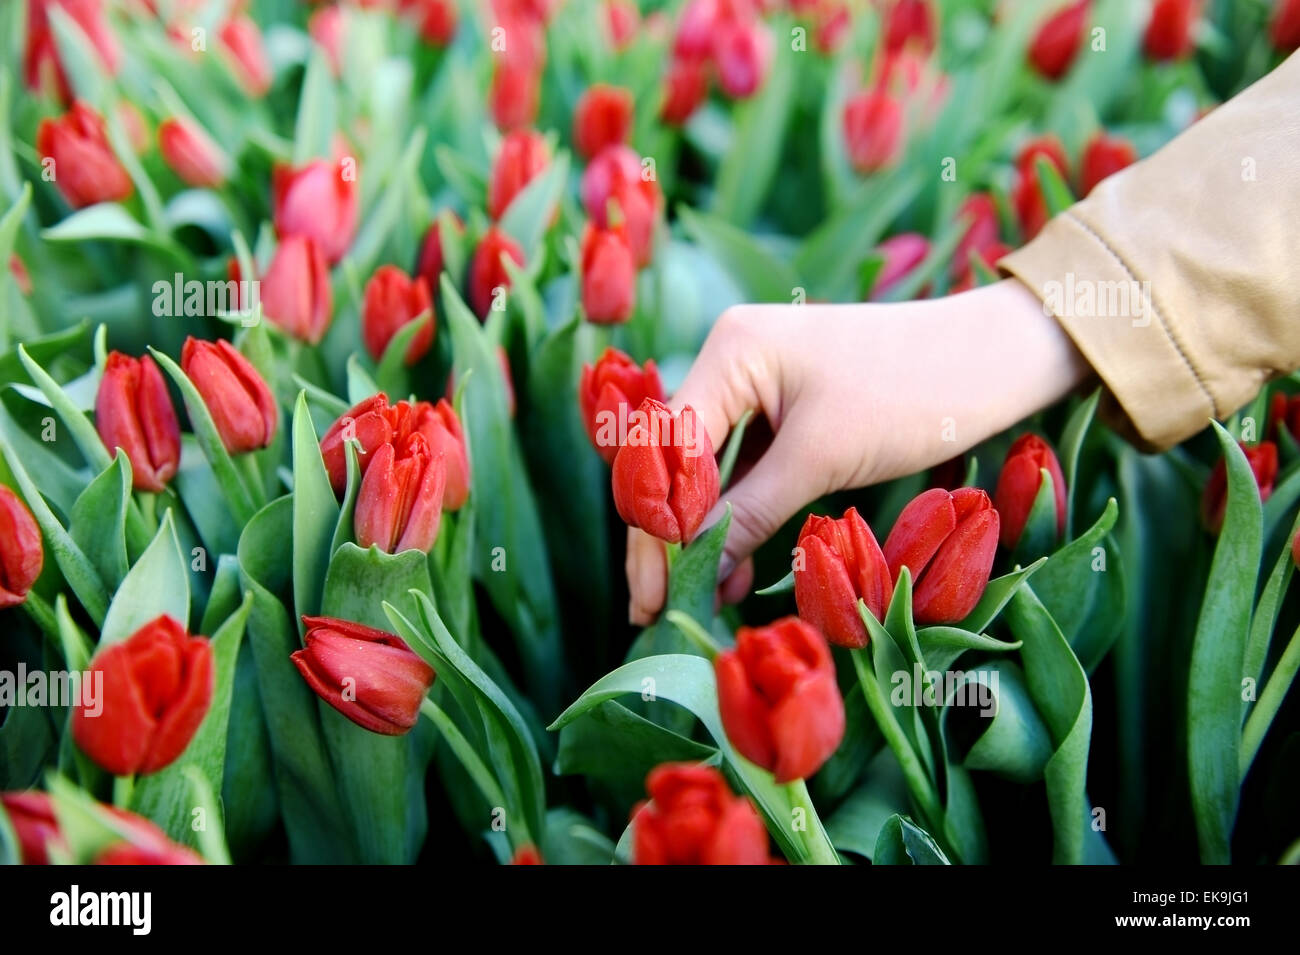 Woman's hand picking up a red tulip from a tulip field in a greenhouse Stock Photo